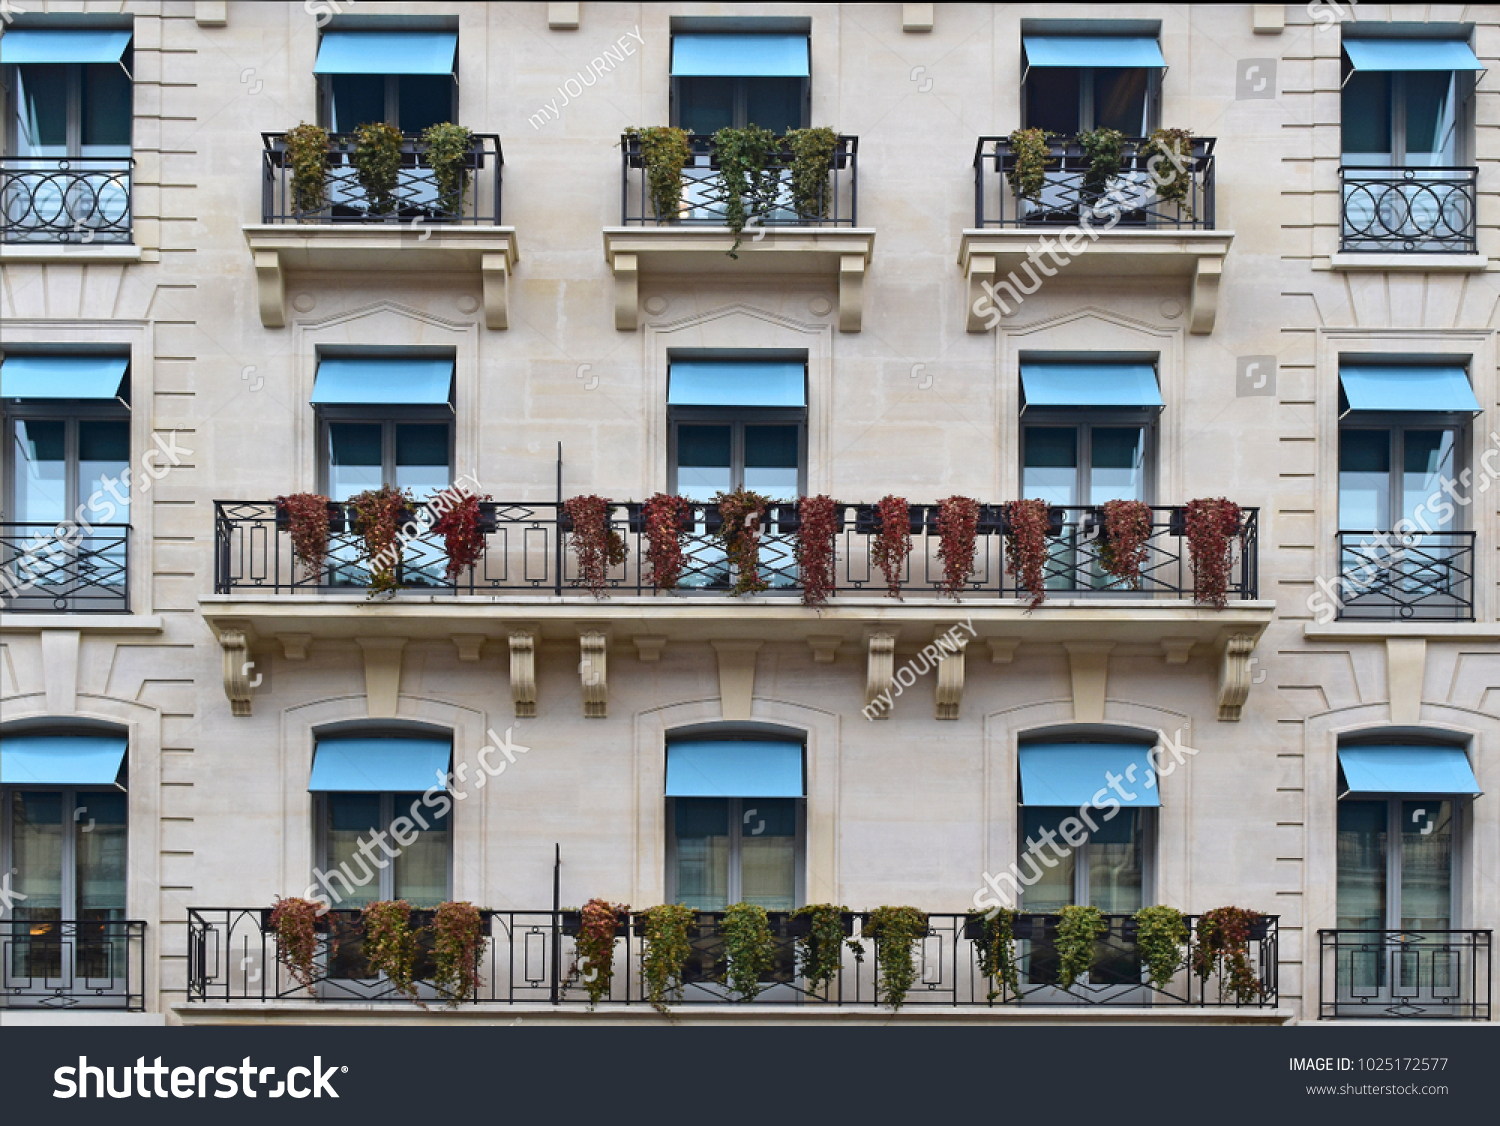 The beautiful style of balconies and windows with flowers hanging, look retro . Concept Vintage balcony in Paris, France.  #1025172577